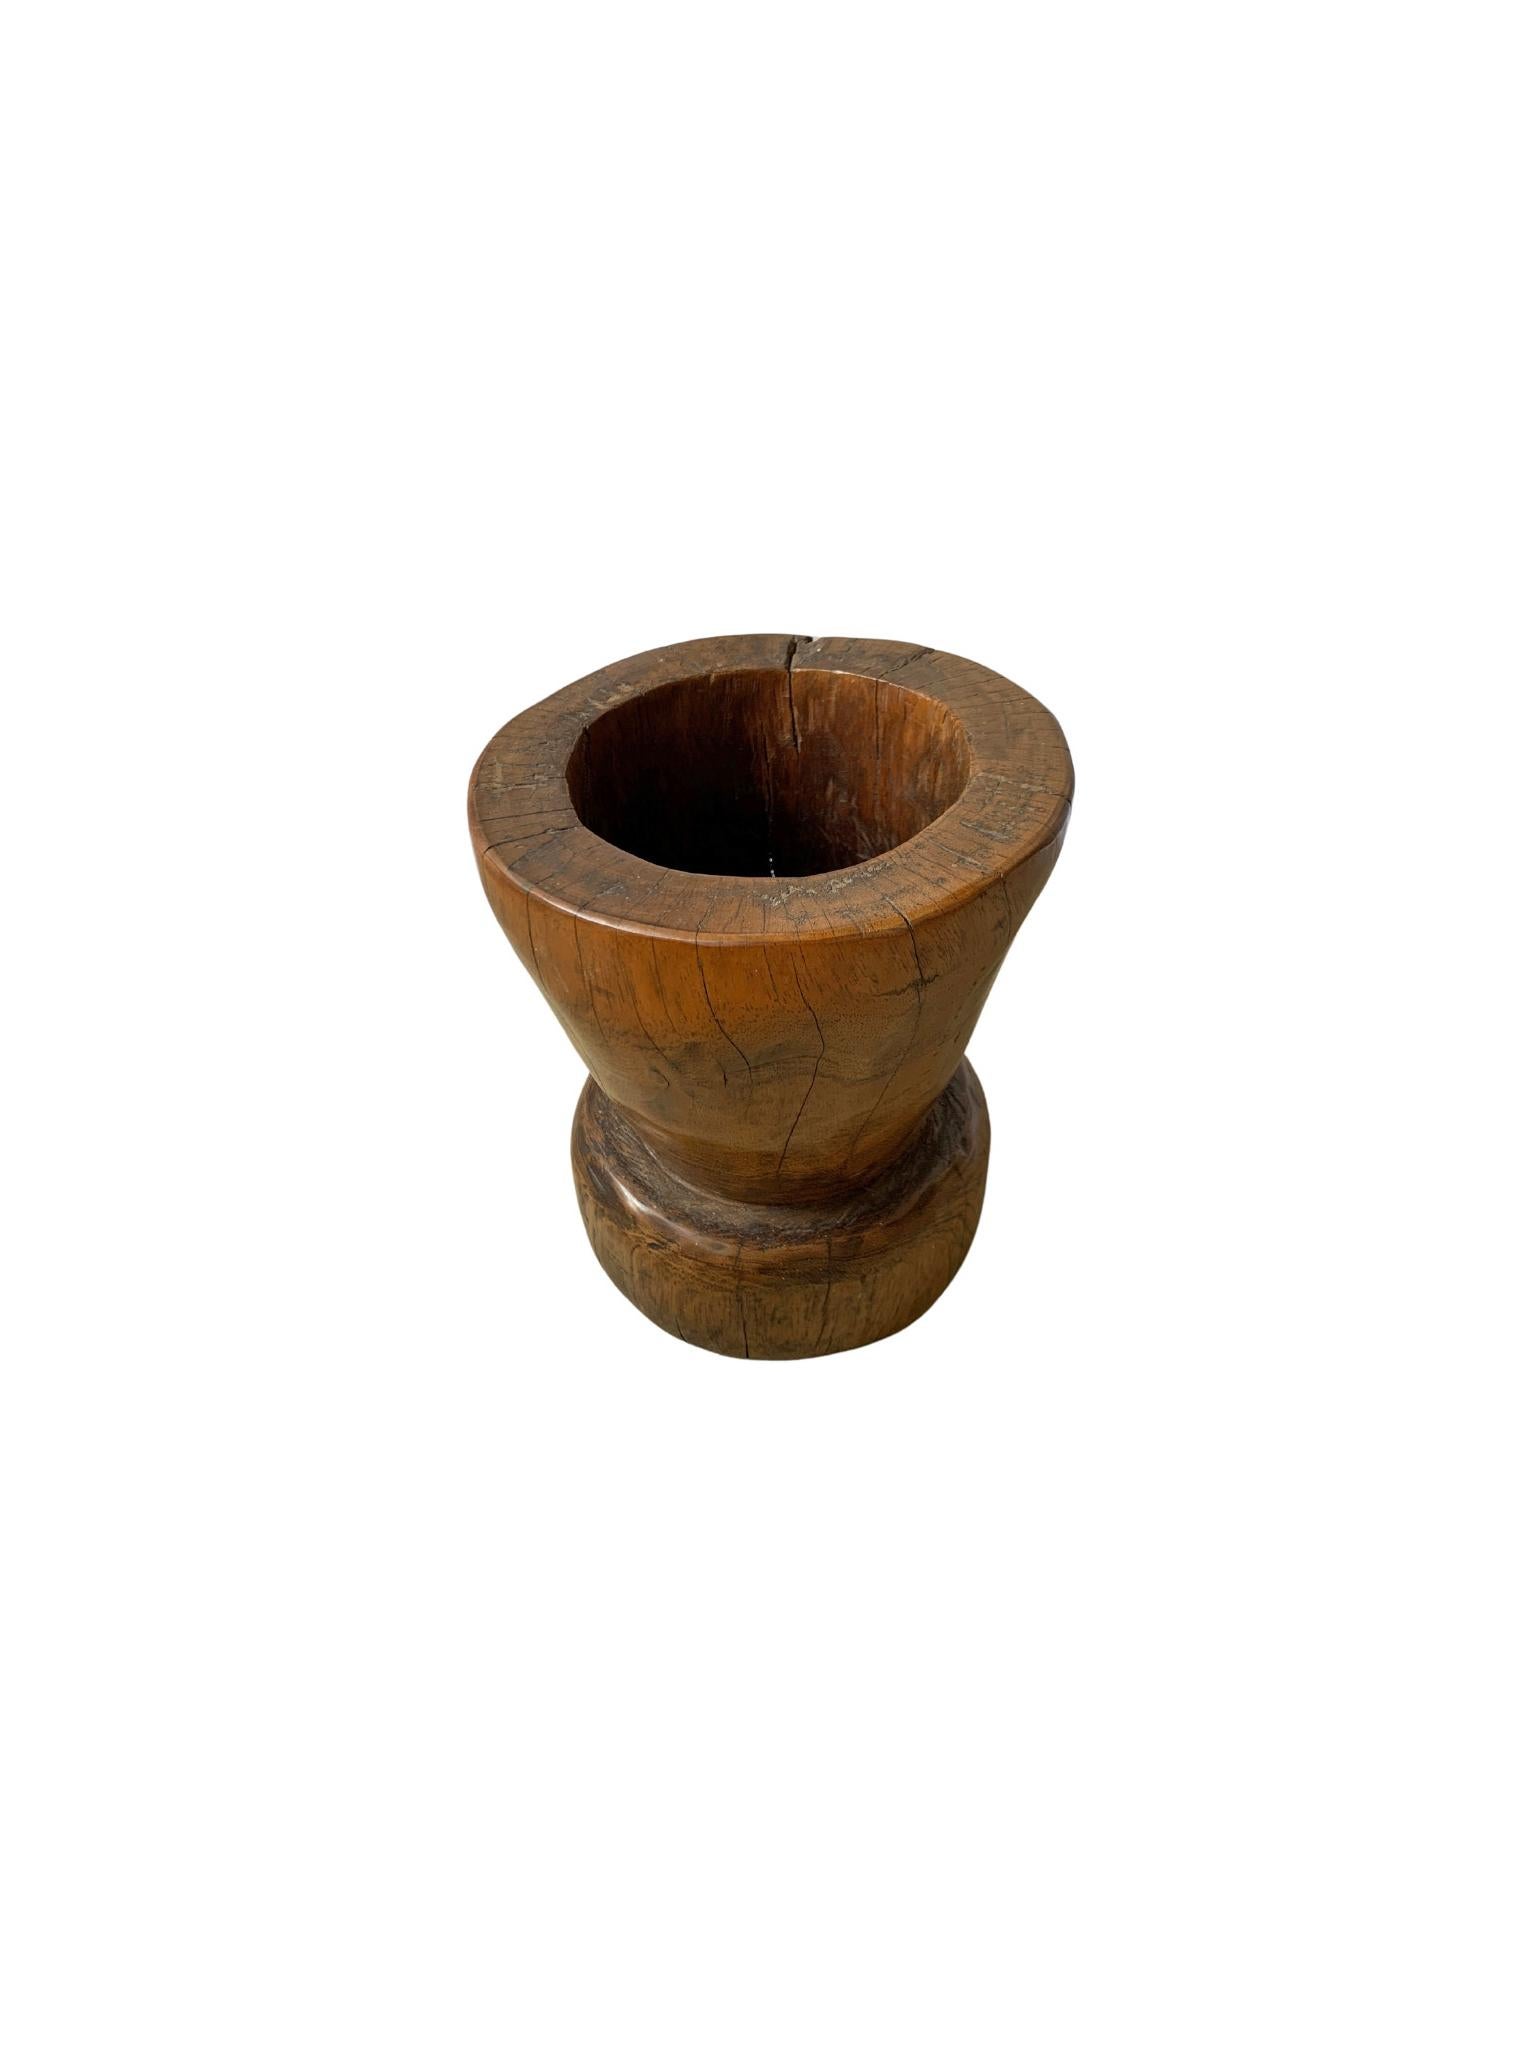 Organic Modern Solid Teak Mortar from Java, Indonesia, C. 1900 For Sale